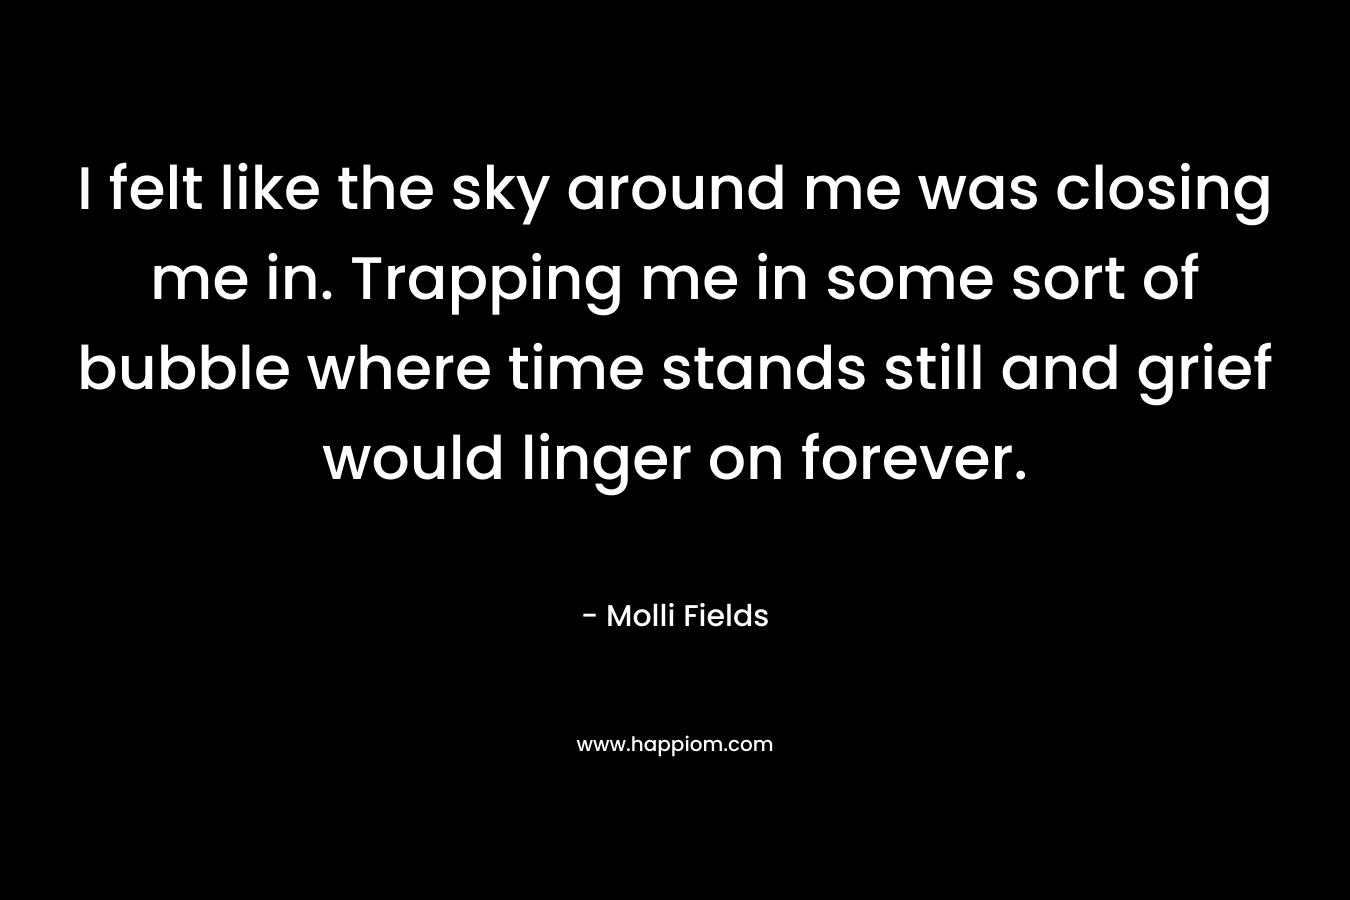 I felt like the sky around me was closing me in. Trapping me in some sort of bubble where time stands still and grief would linger on forever. – Molli Fields